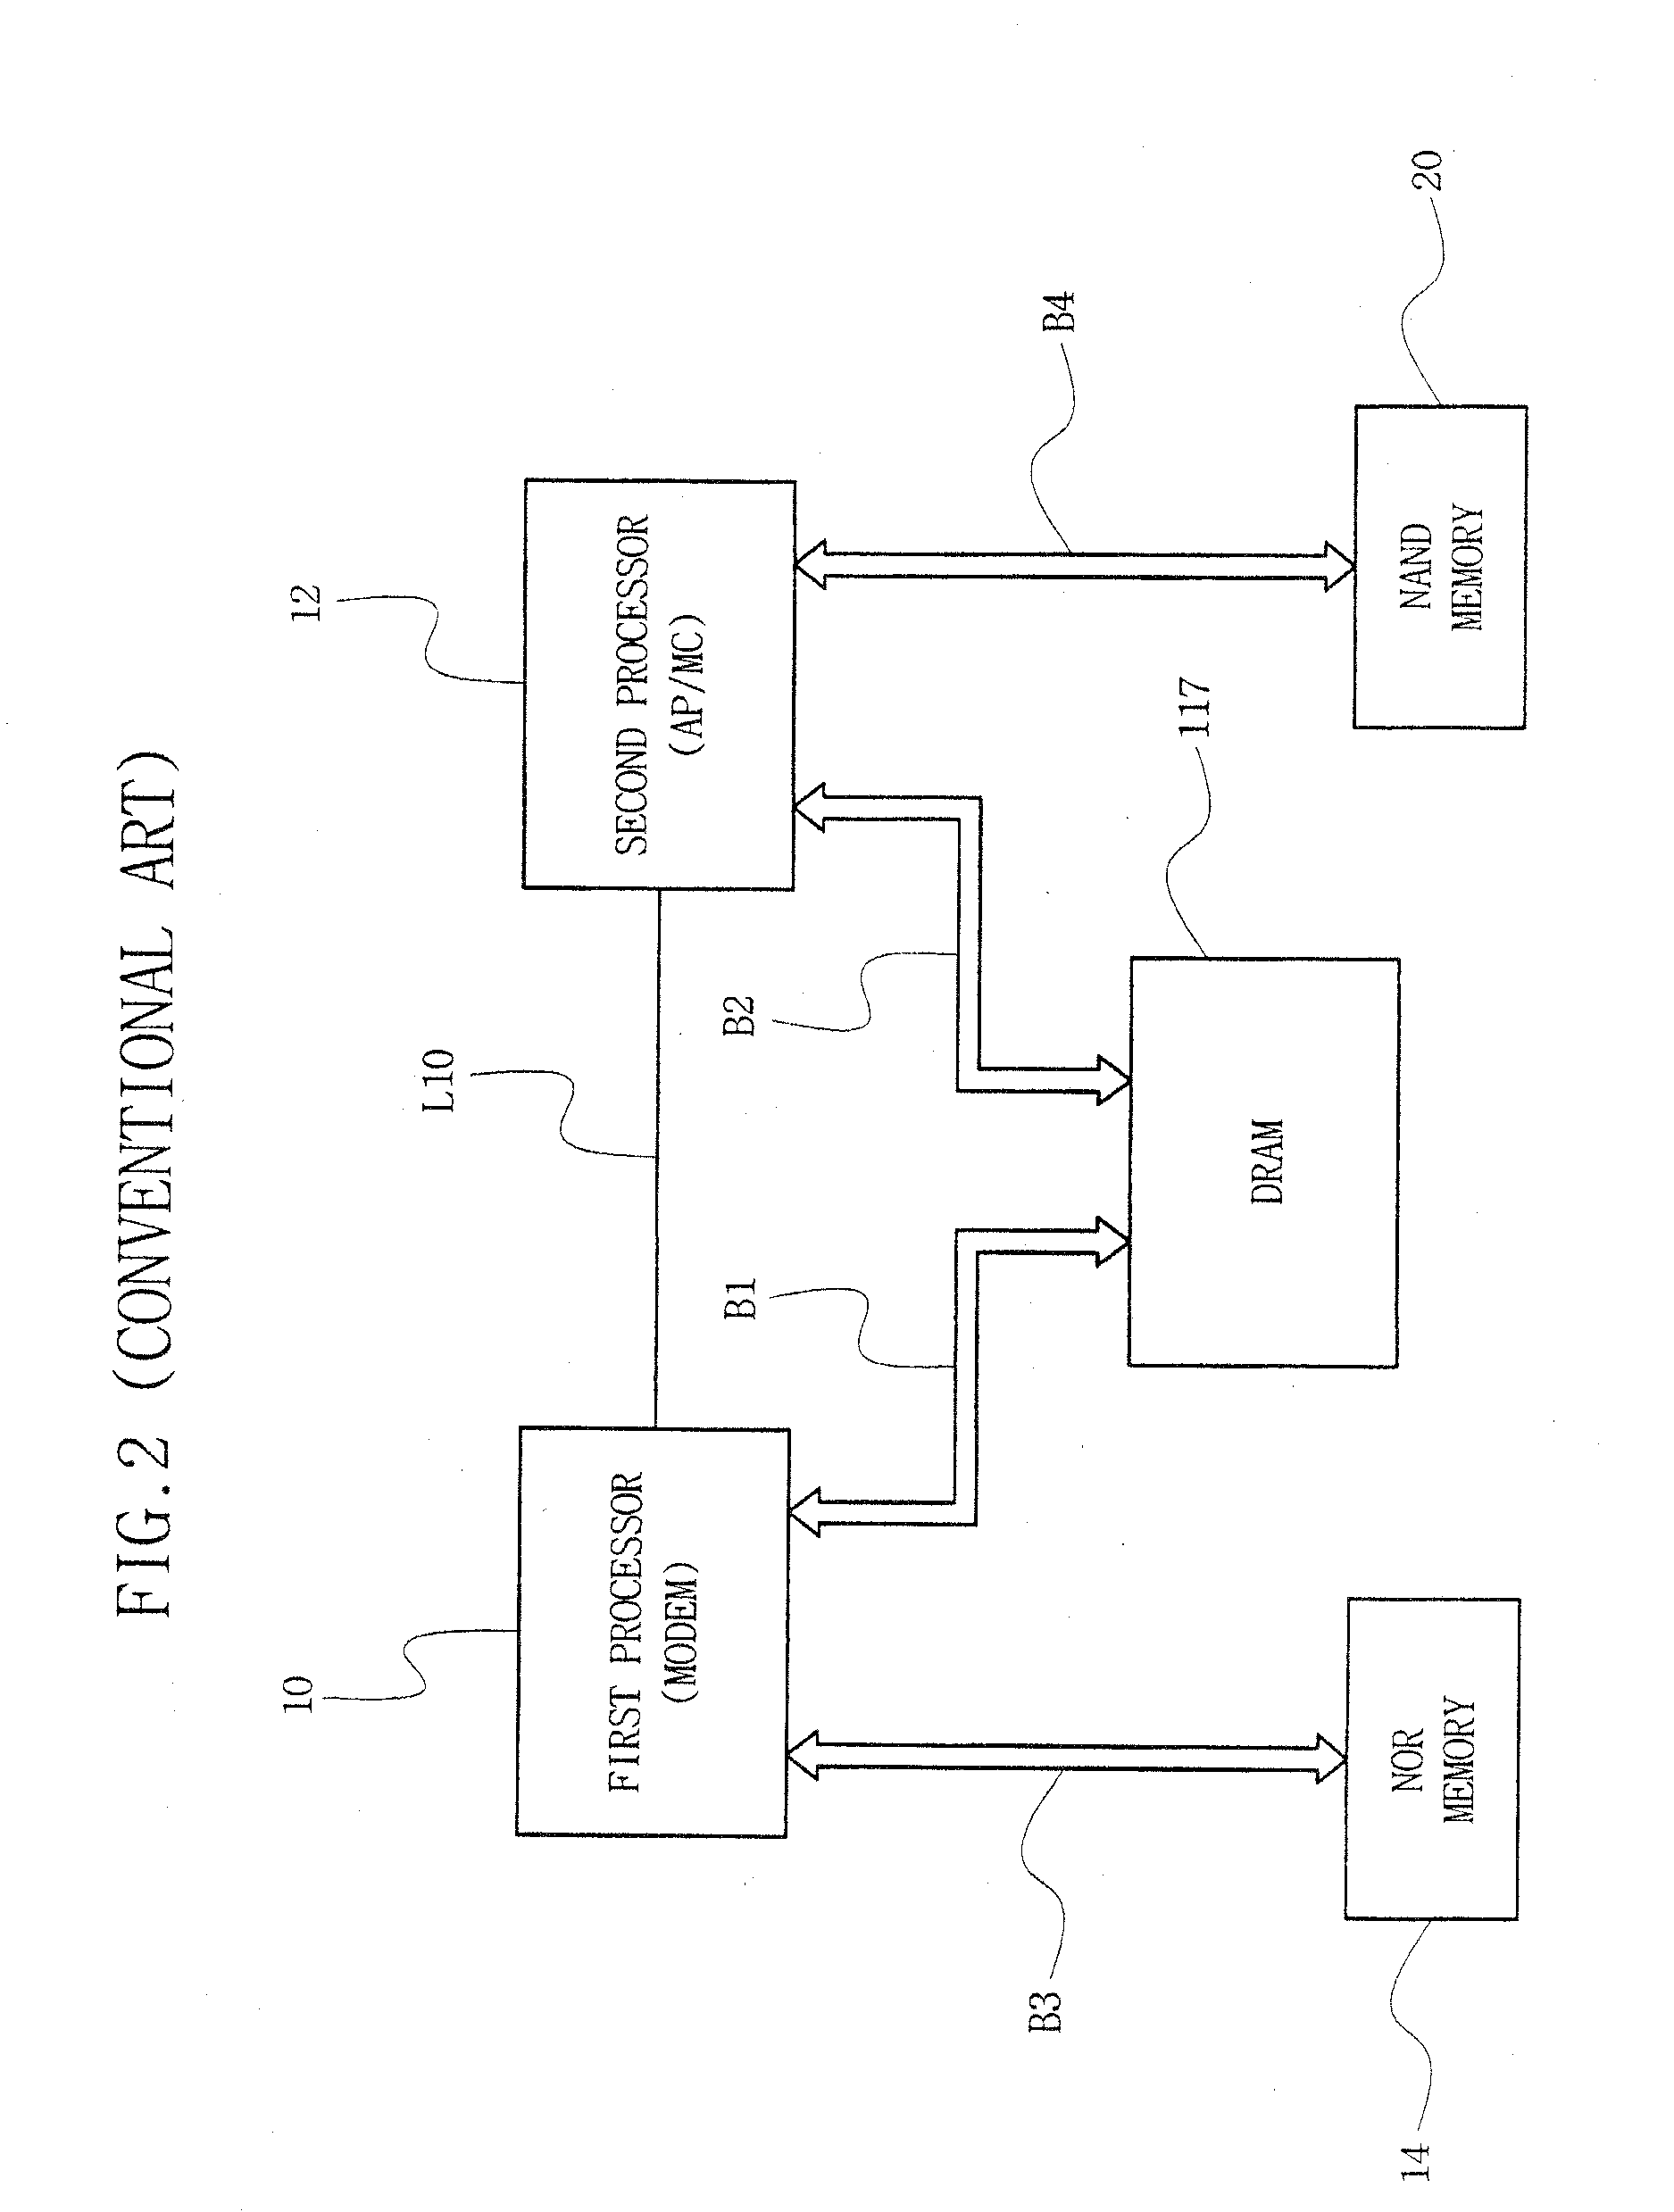 Multi-path accessible semiconductor memory device